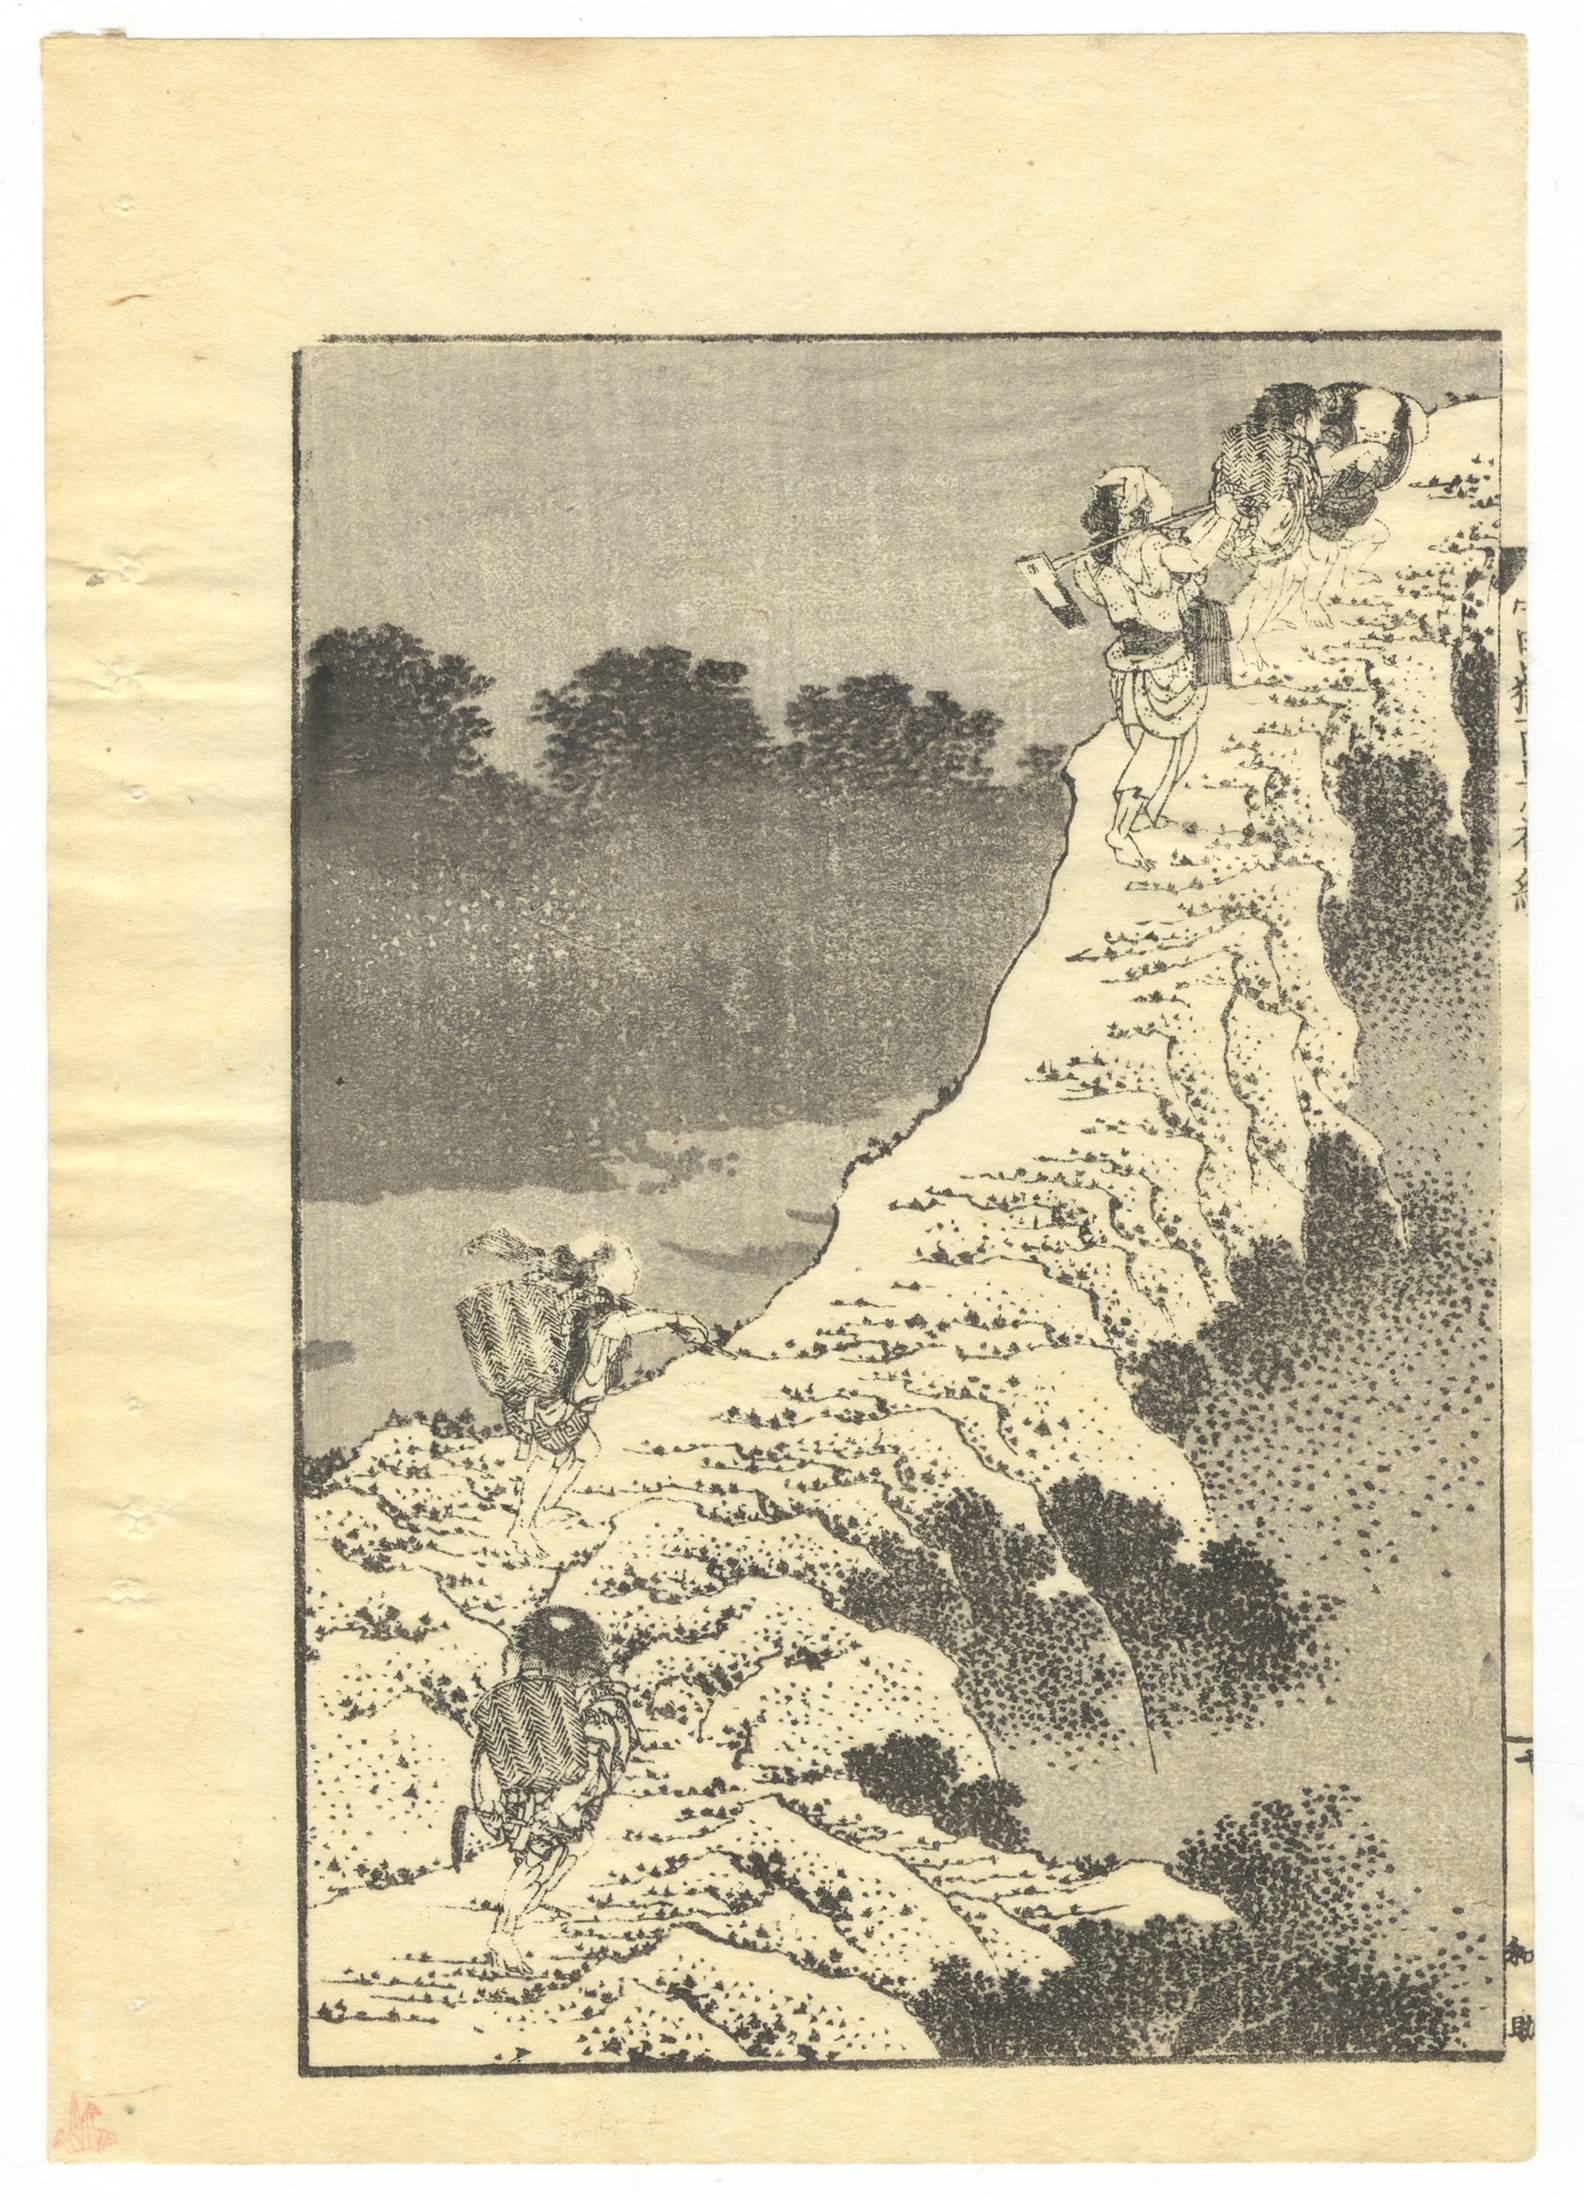 Hand-printed on traditional Japanese washi paper (mulberry tree paper).

Artist: Katsushika Hokusai
Title: Mt. Fuji in the fog
Series: 100 Views of Mt Fuji volume 1
Publisher: Eirakuya Toshiro
Published: 1835-1880

This print is from the series one